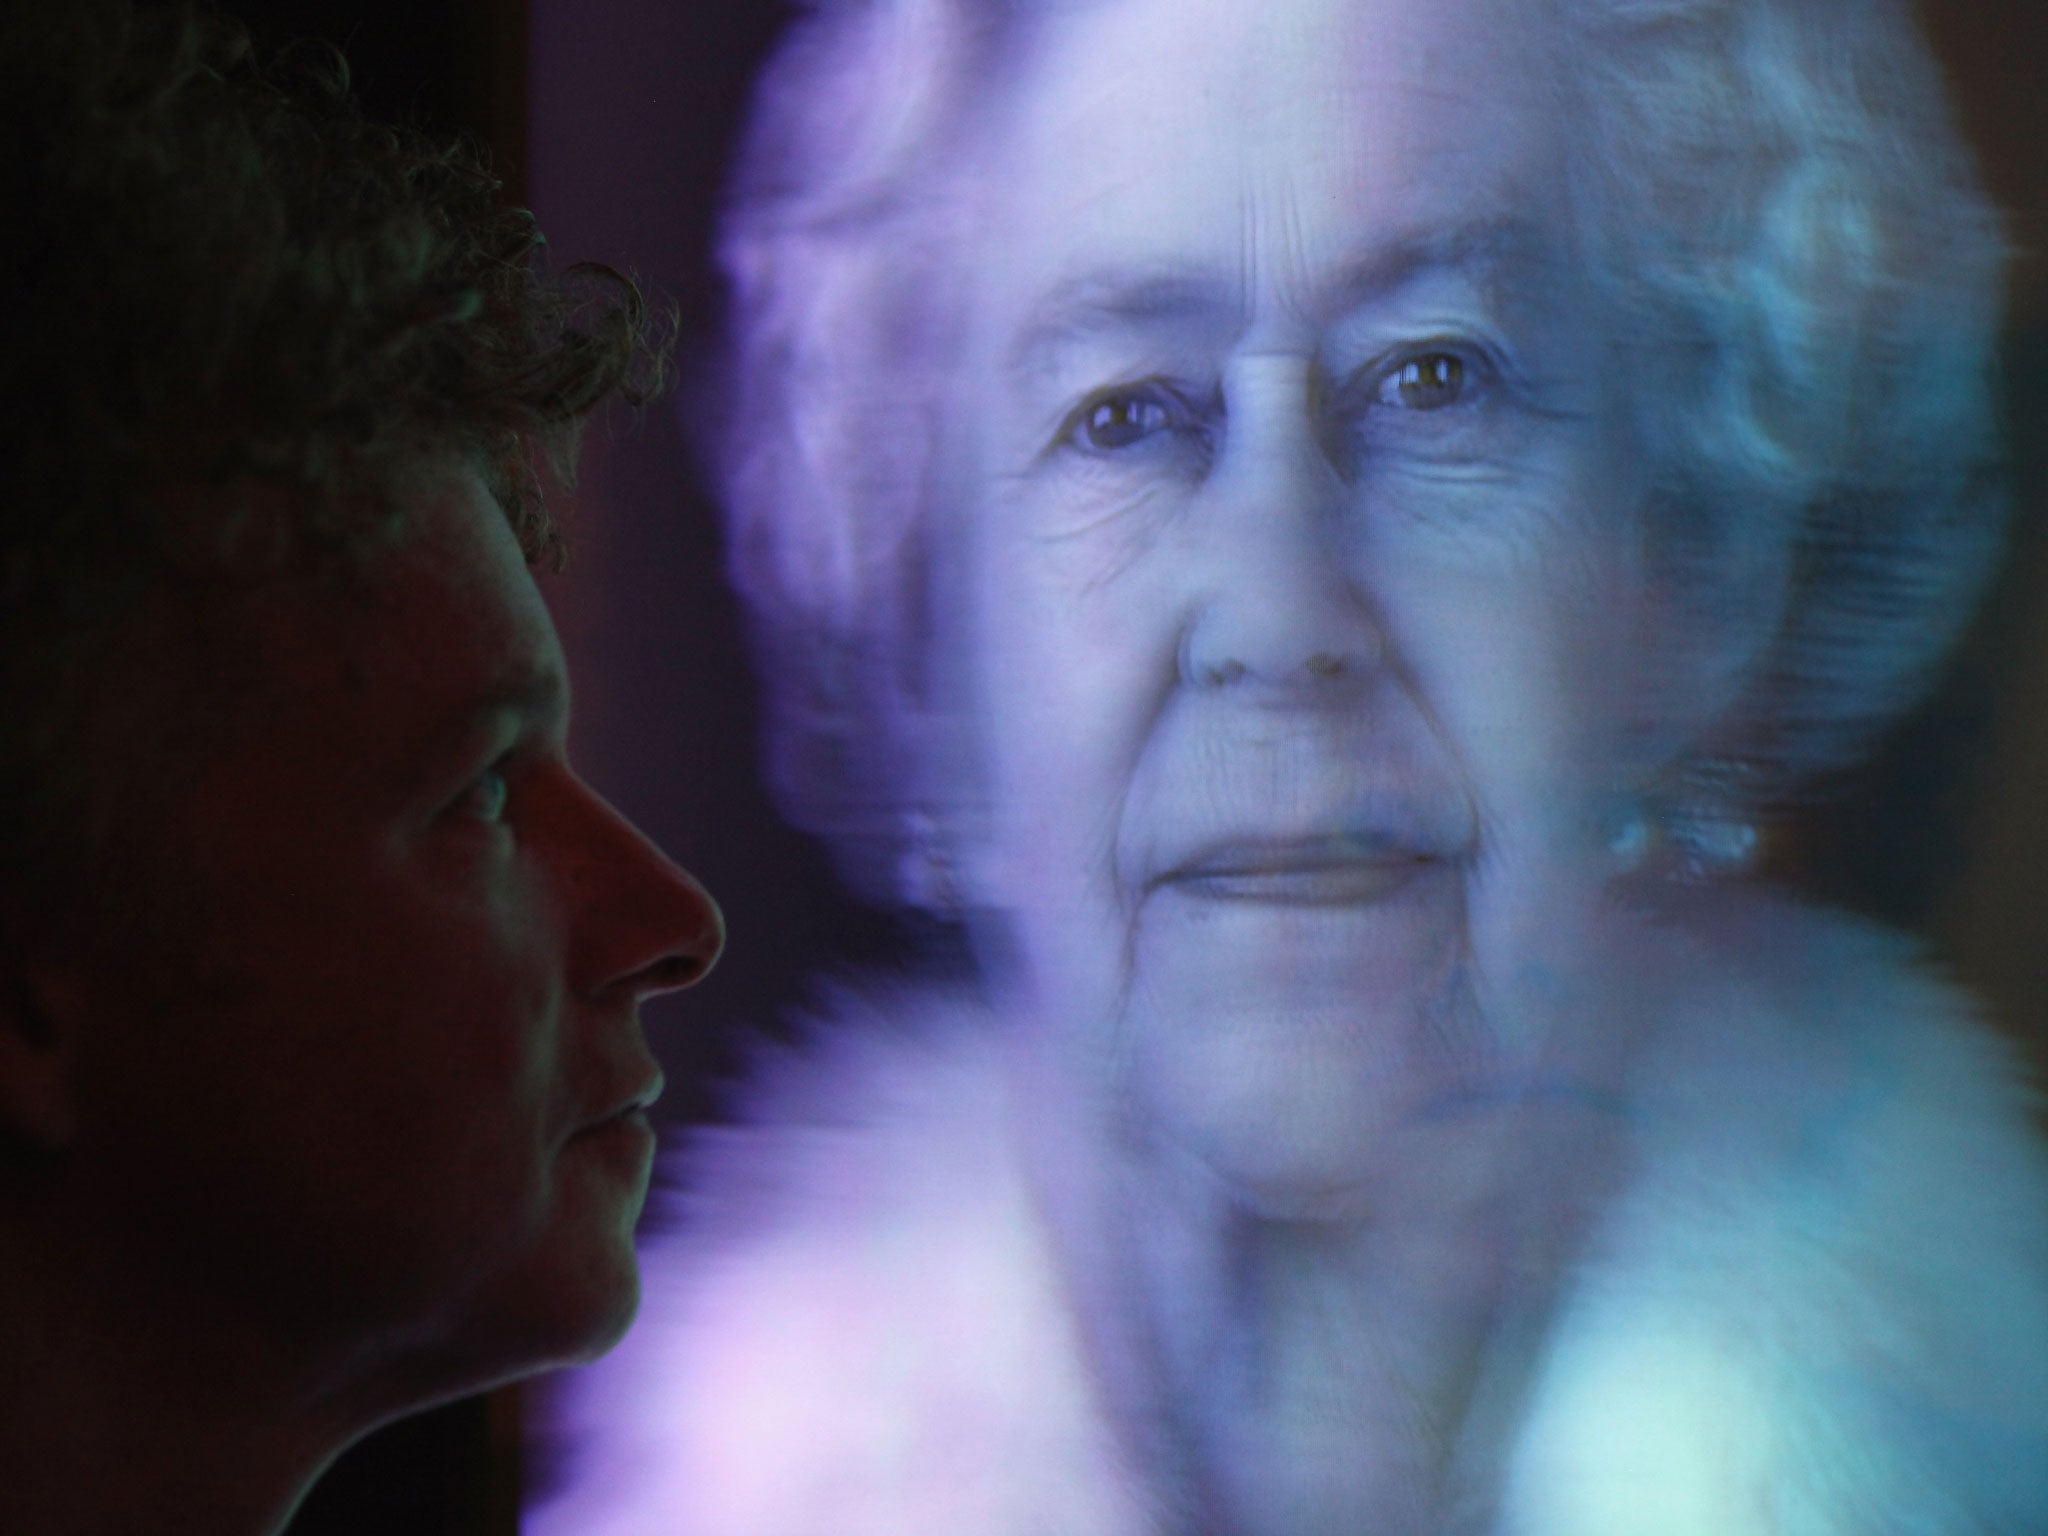 Artist Chris Levine views his hologram image of Her Majesty Queen Elizabeth II entitled 'Equanimity'